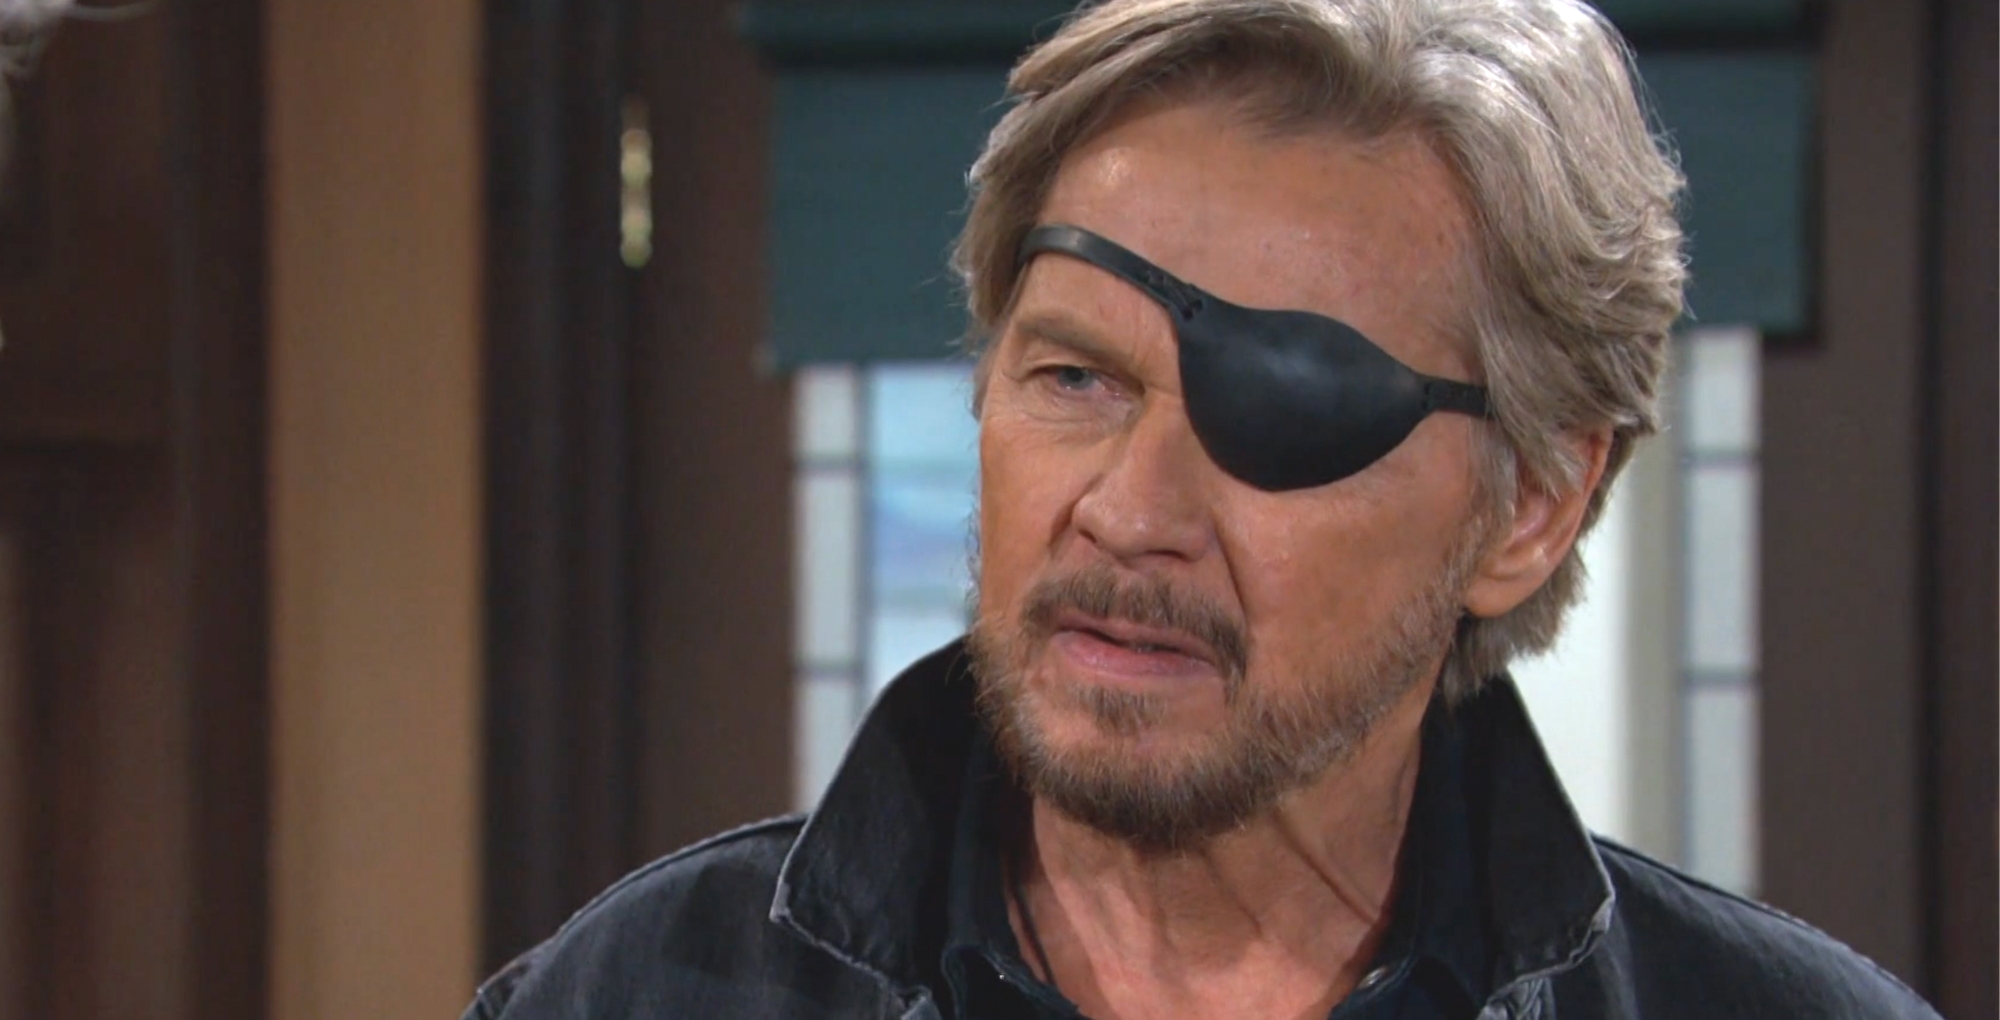 days of our lives spoilers for february 3, 2023, has steve johnson at the pub